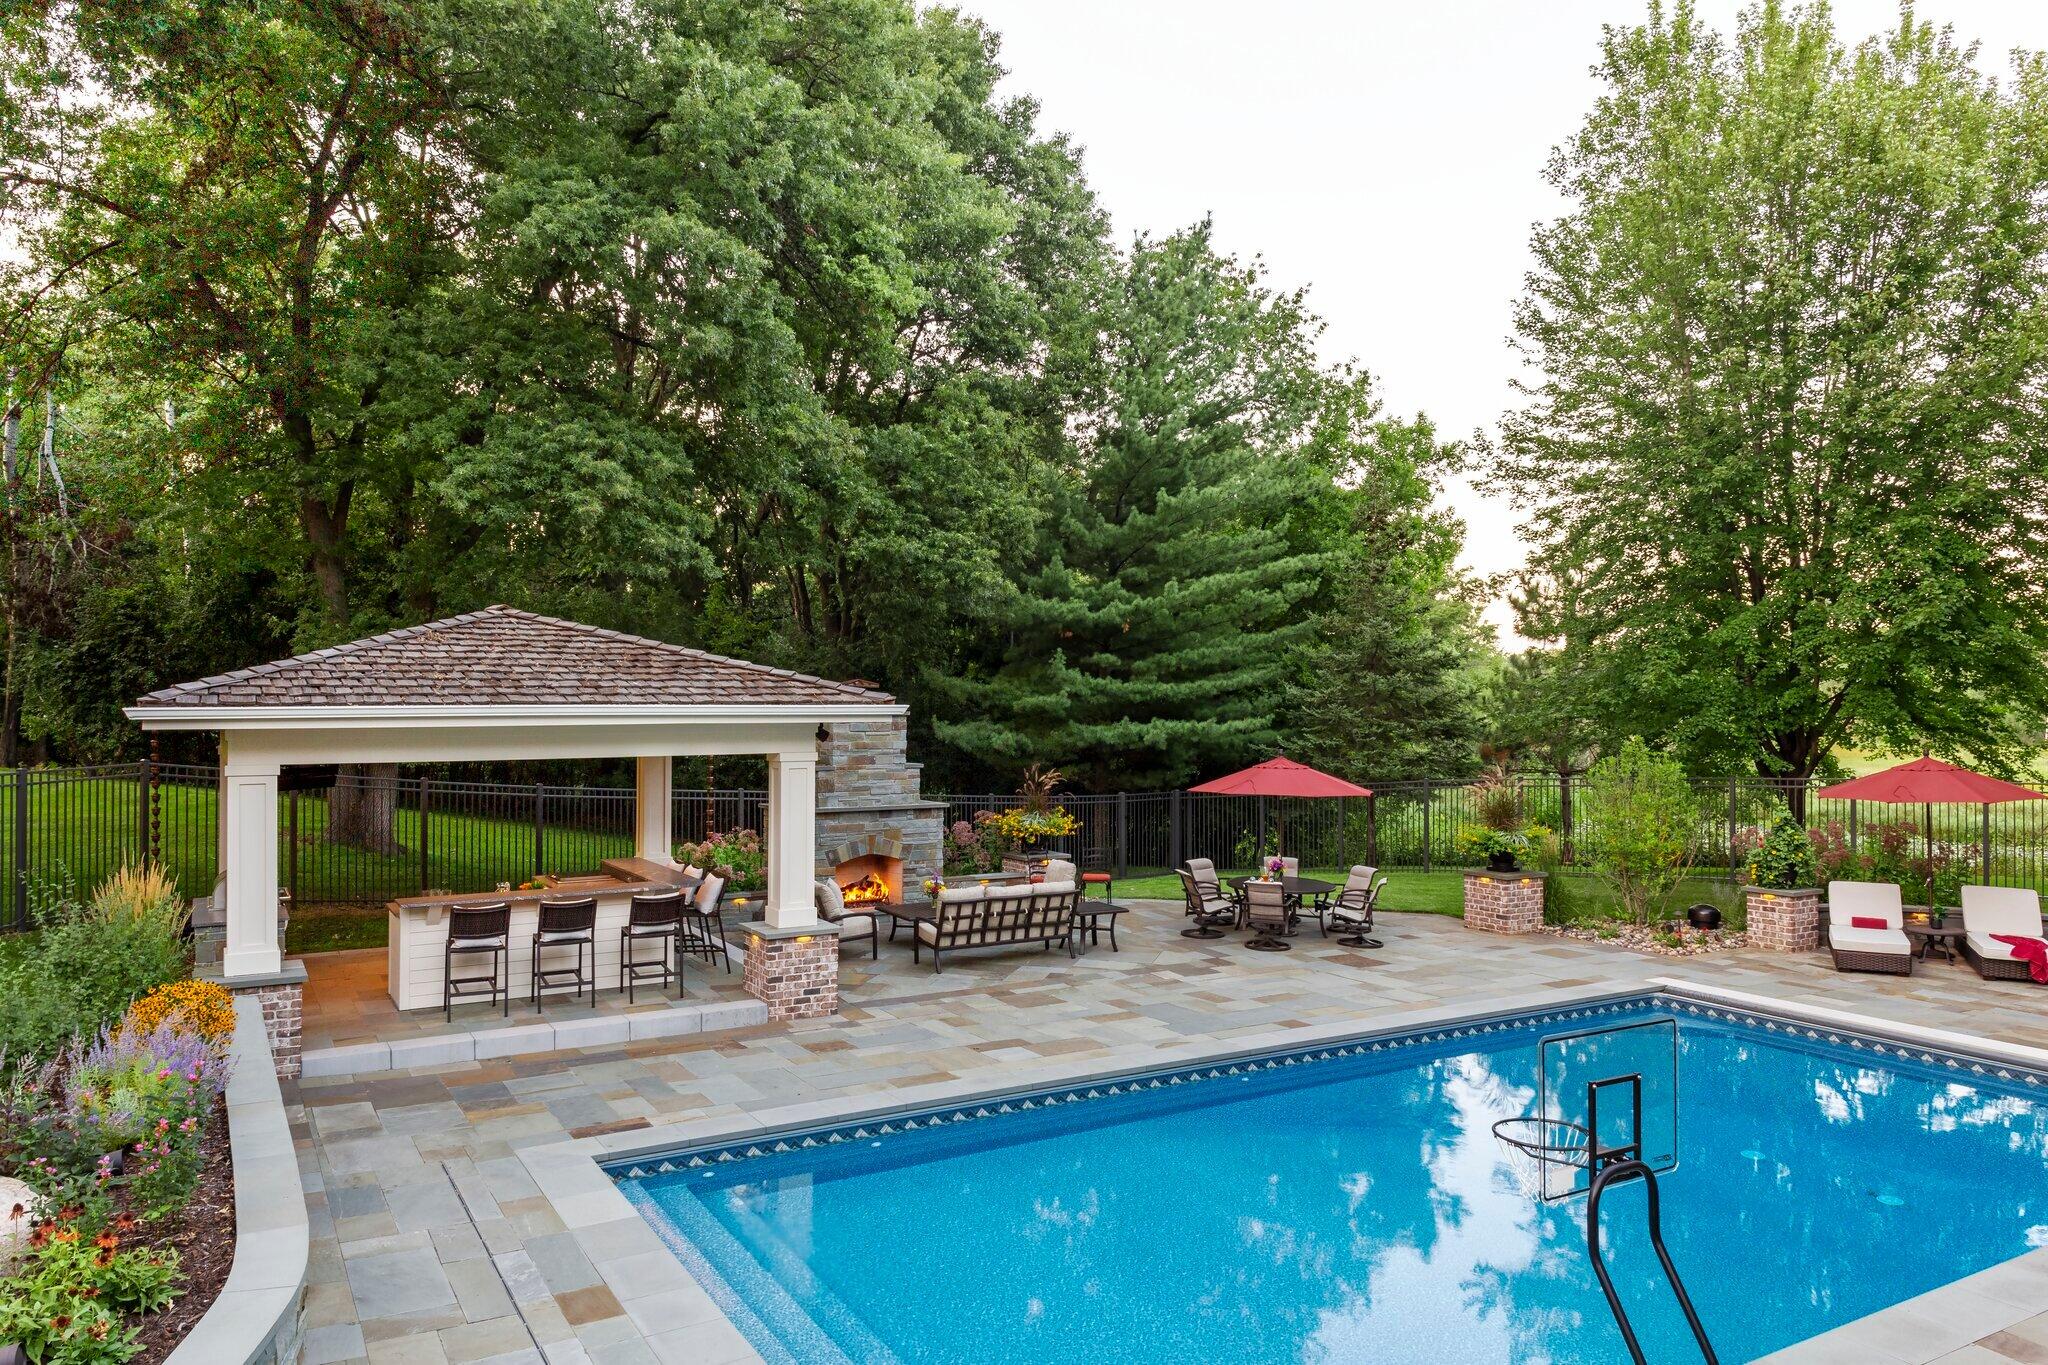 backyard featuring a swimming pool, fireplace and covered outdoor kitchen